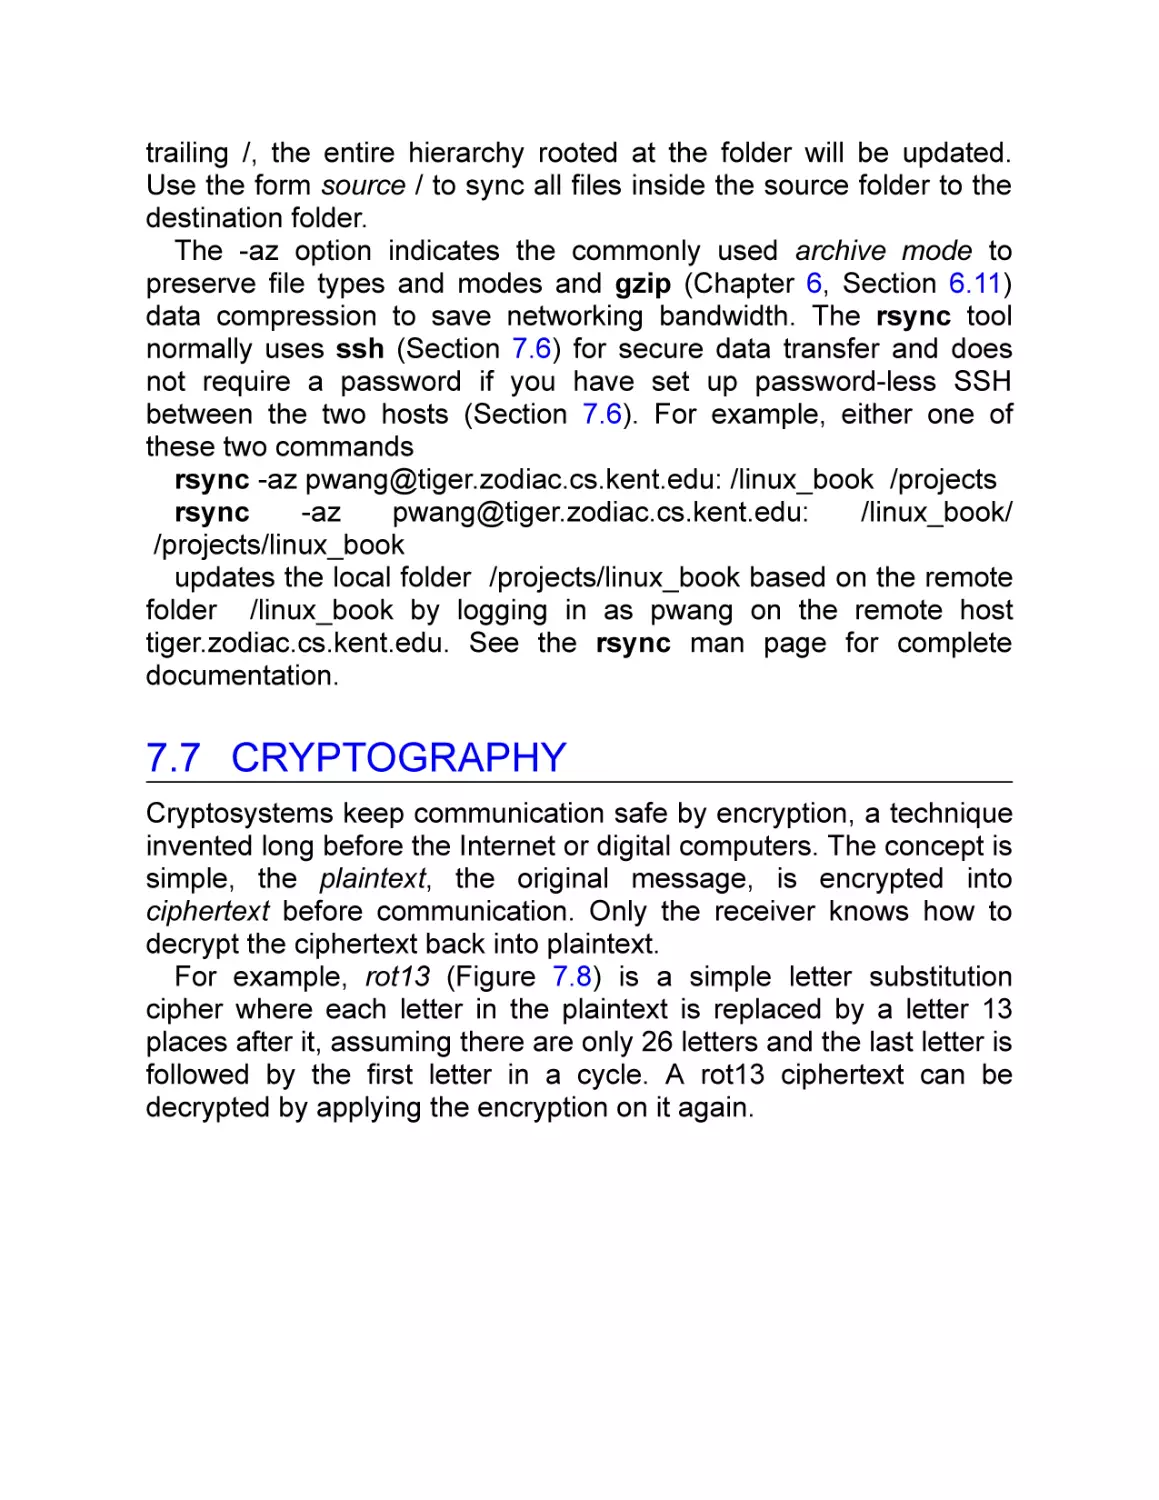 7.7 Cryptography